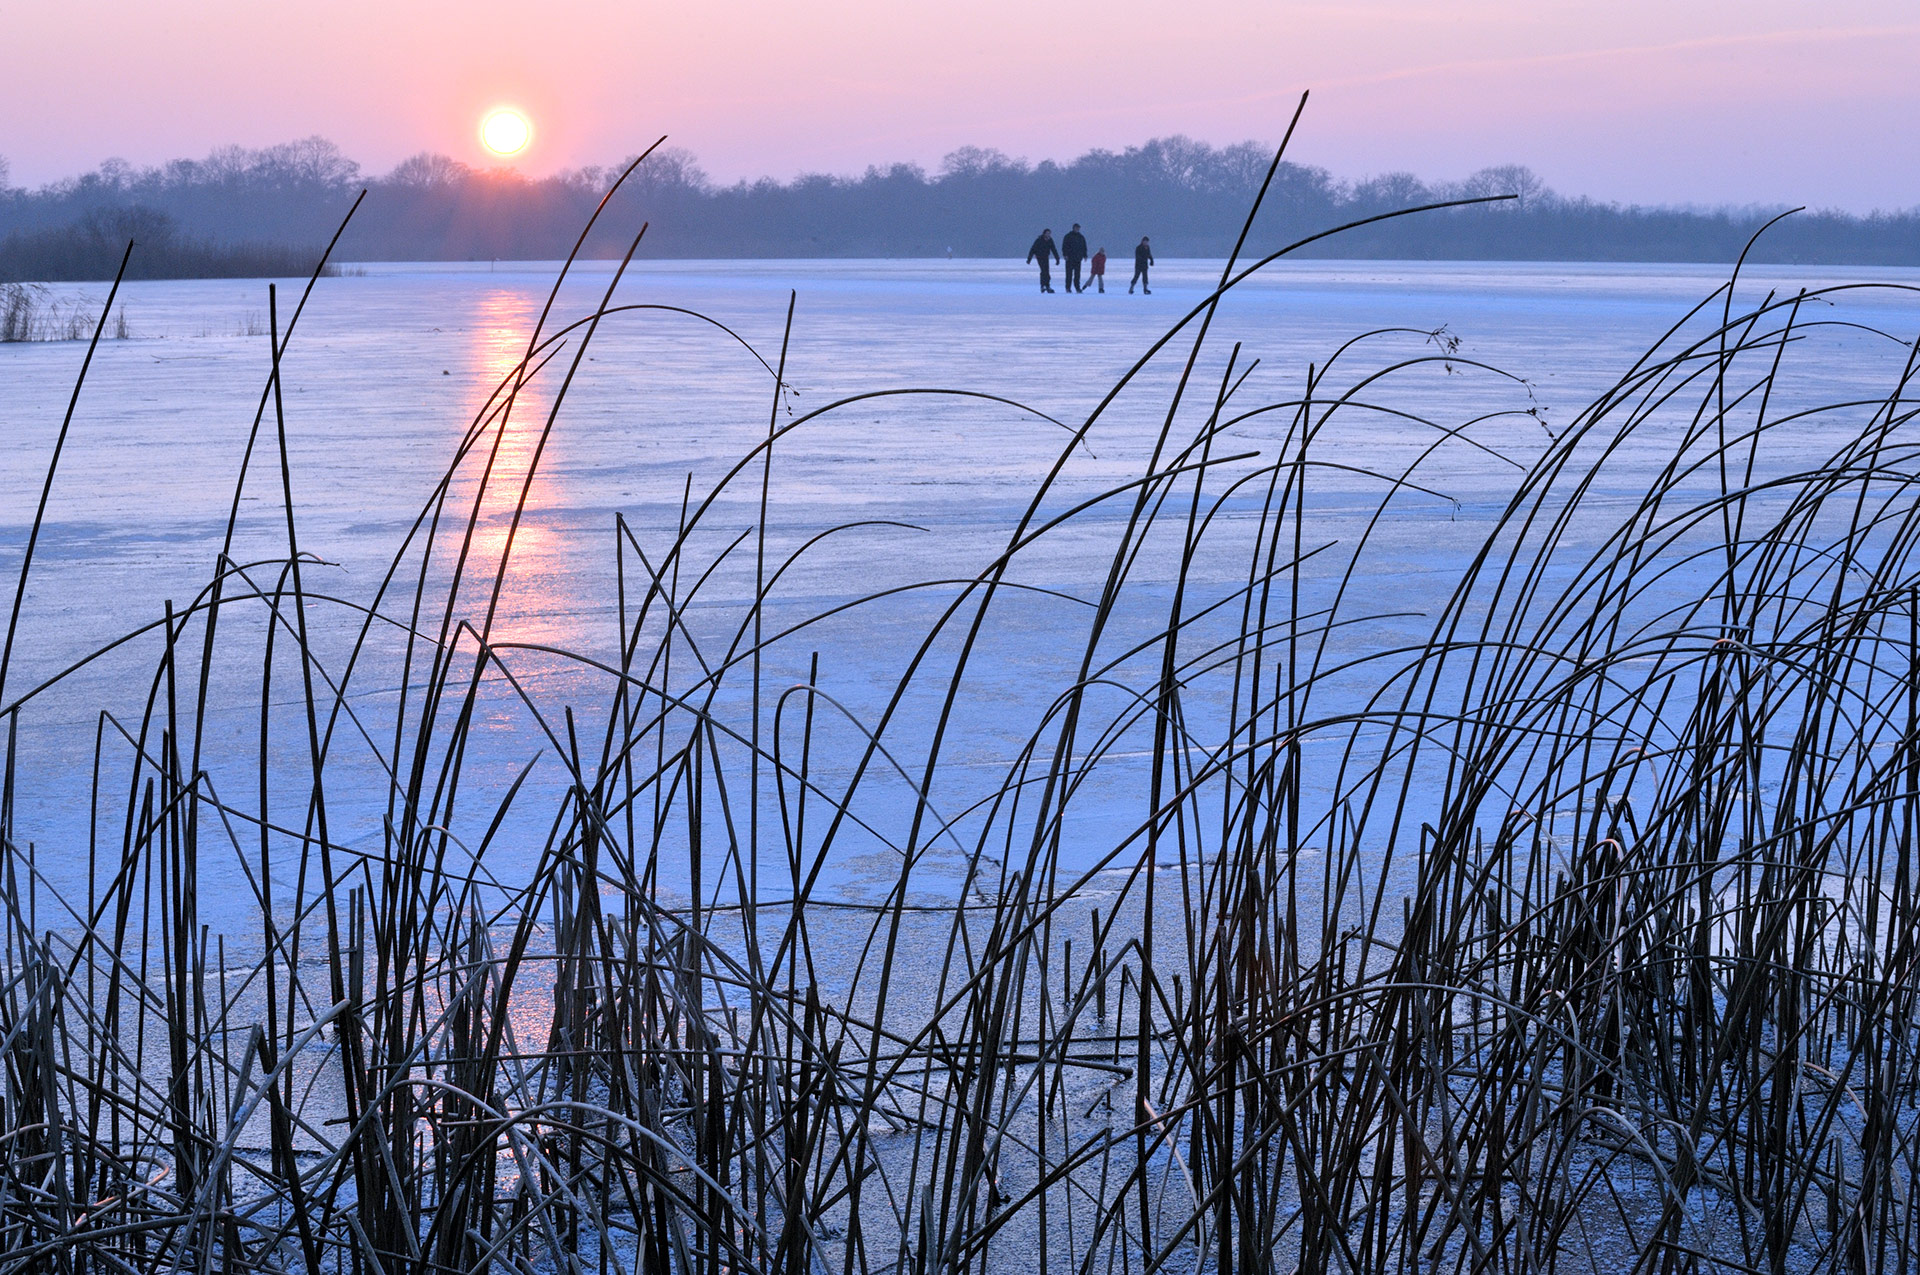 A family of ice skaters on the Ankeveense Plassen at sunset